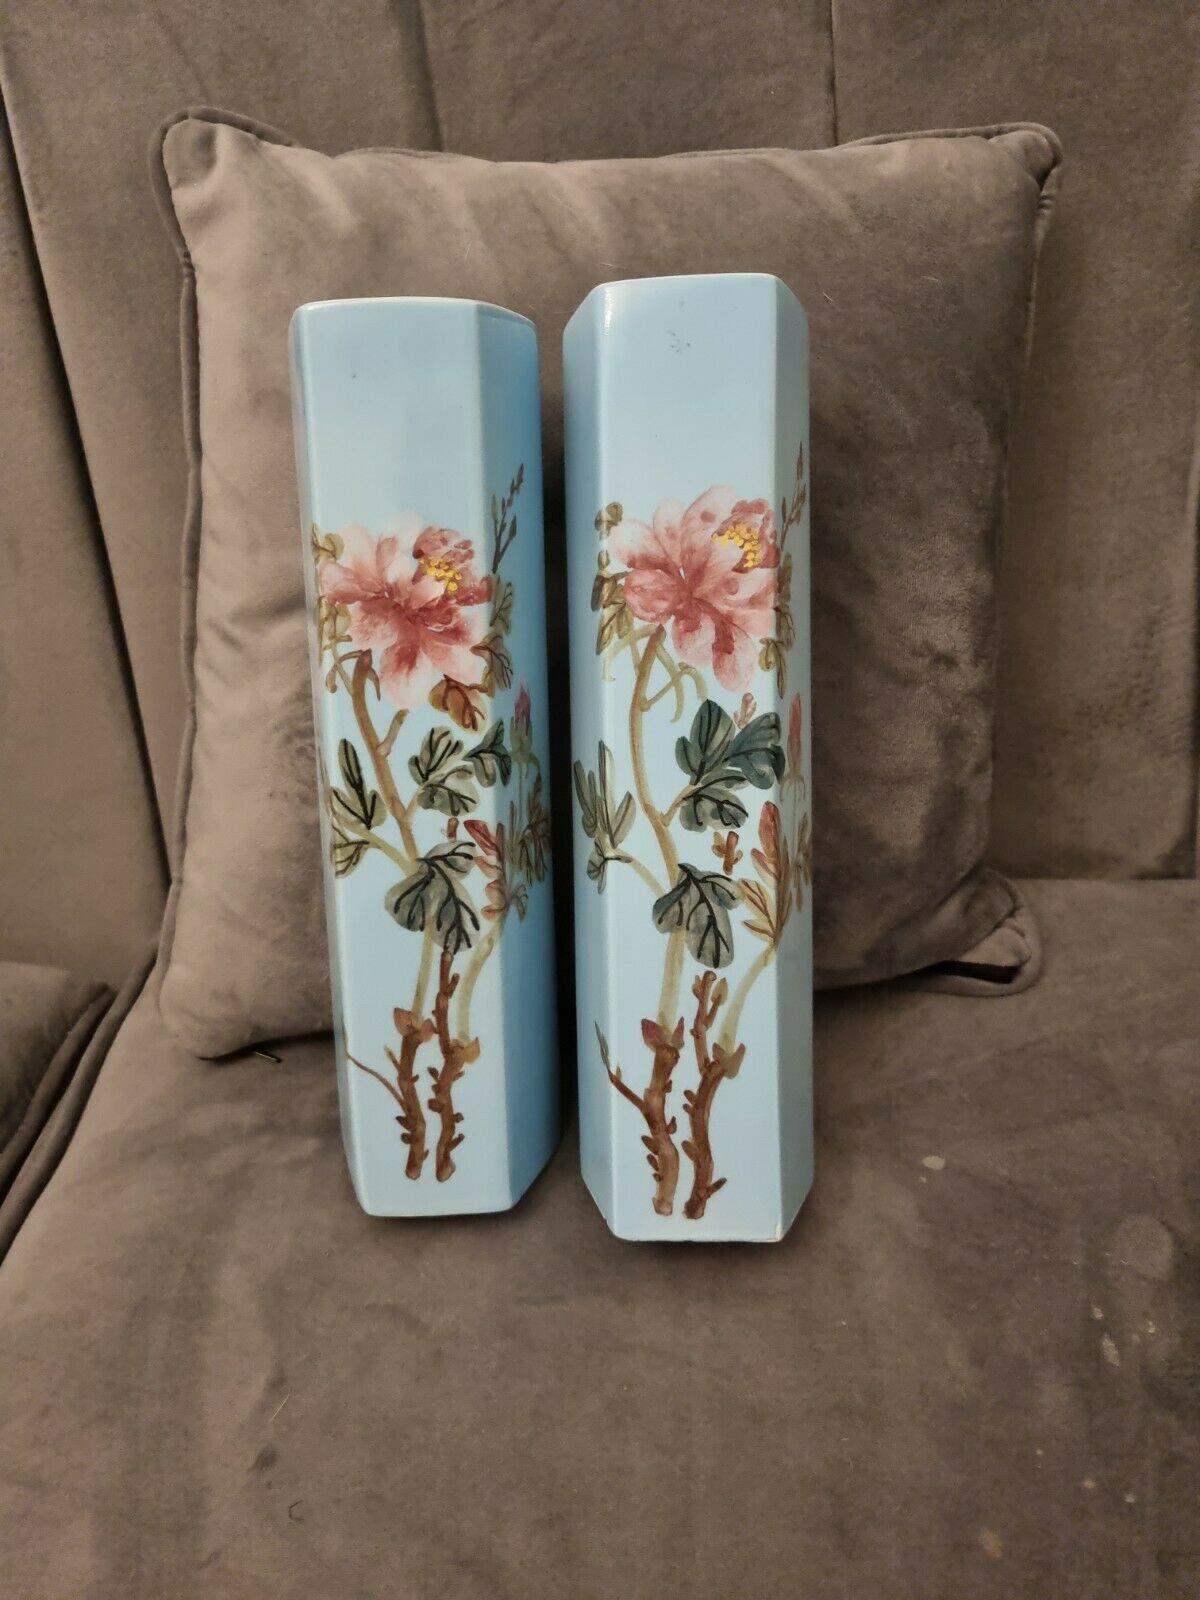 Taiwan Roc Porcelain,2 beautiful vases in Blue flower pattern & marked on base.